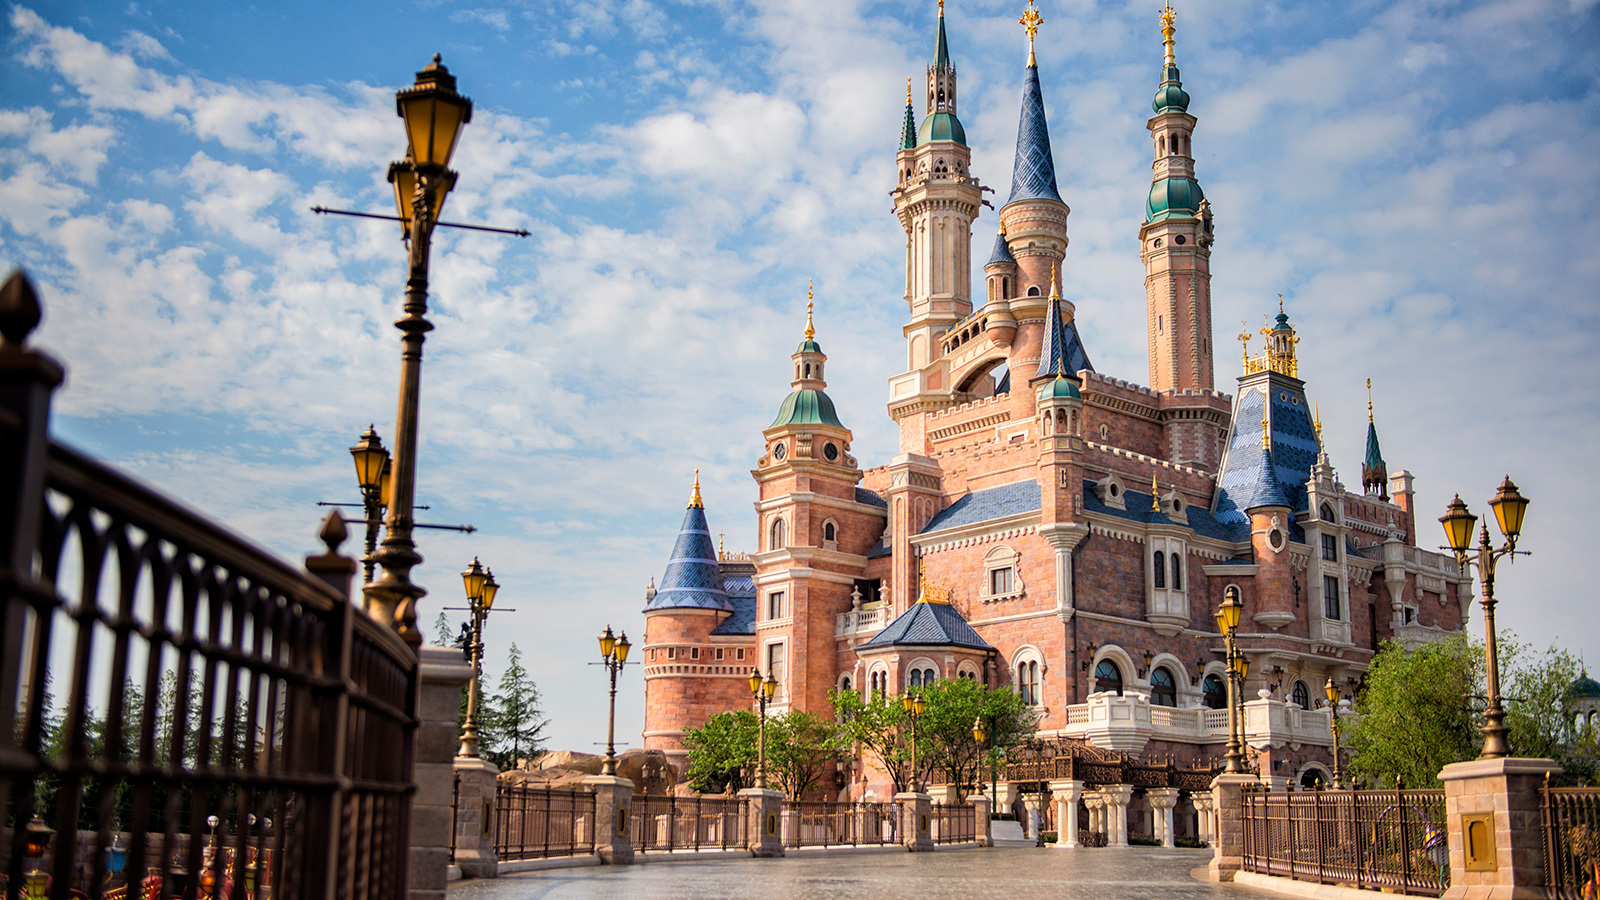 Shanghai Disney Resort Honored as First Eco-China Experience-based Education Destination